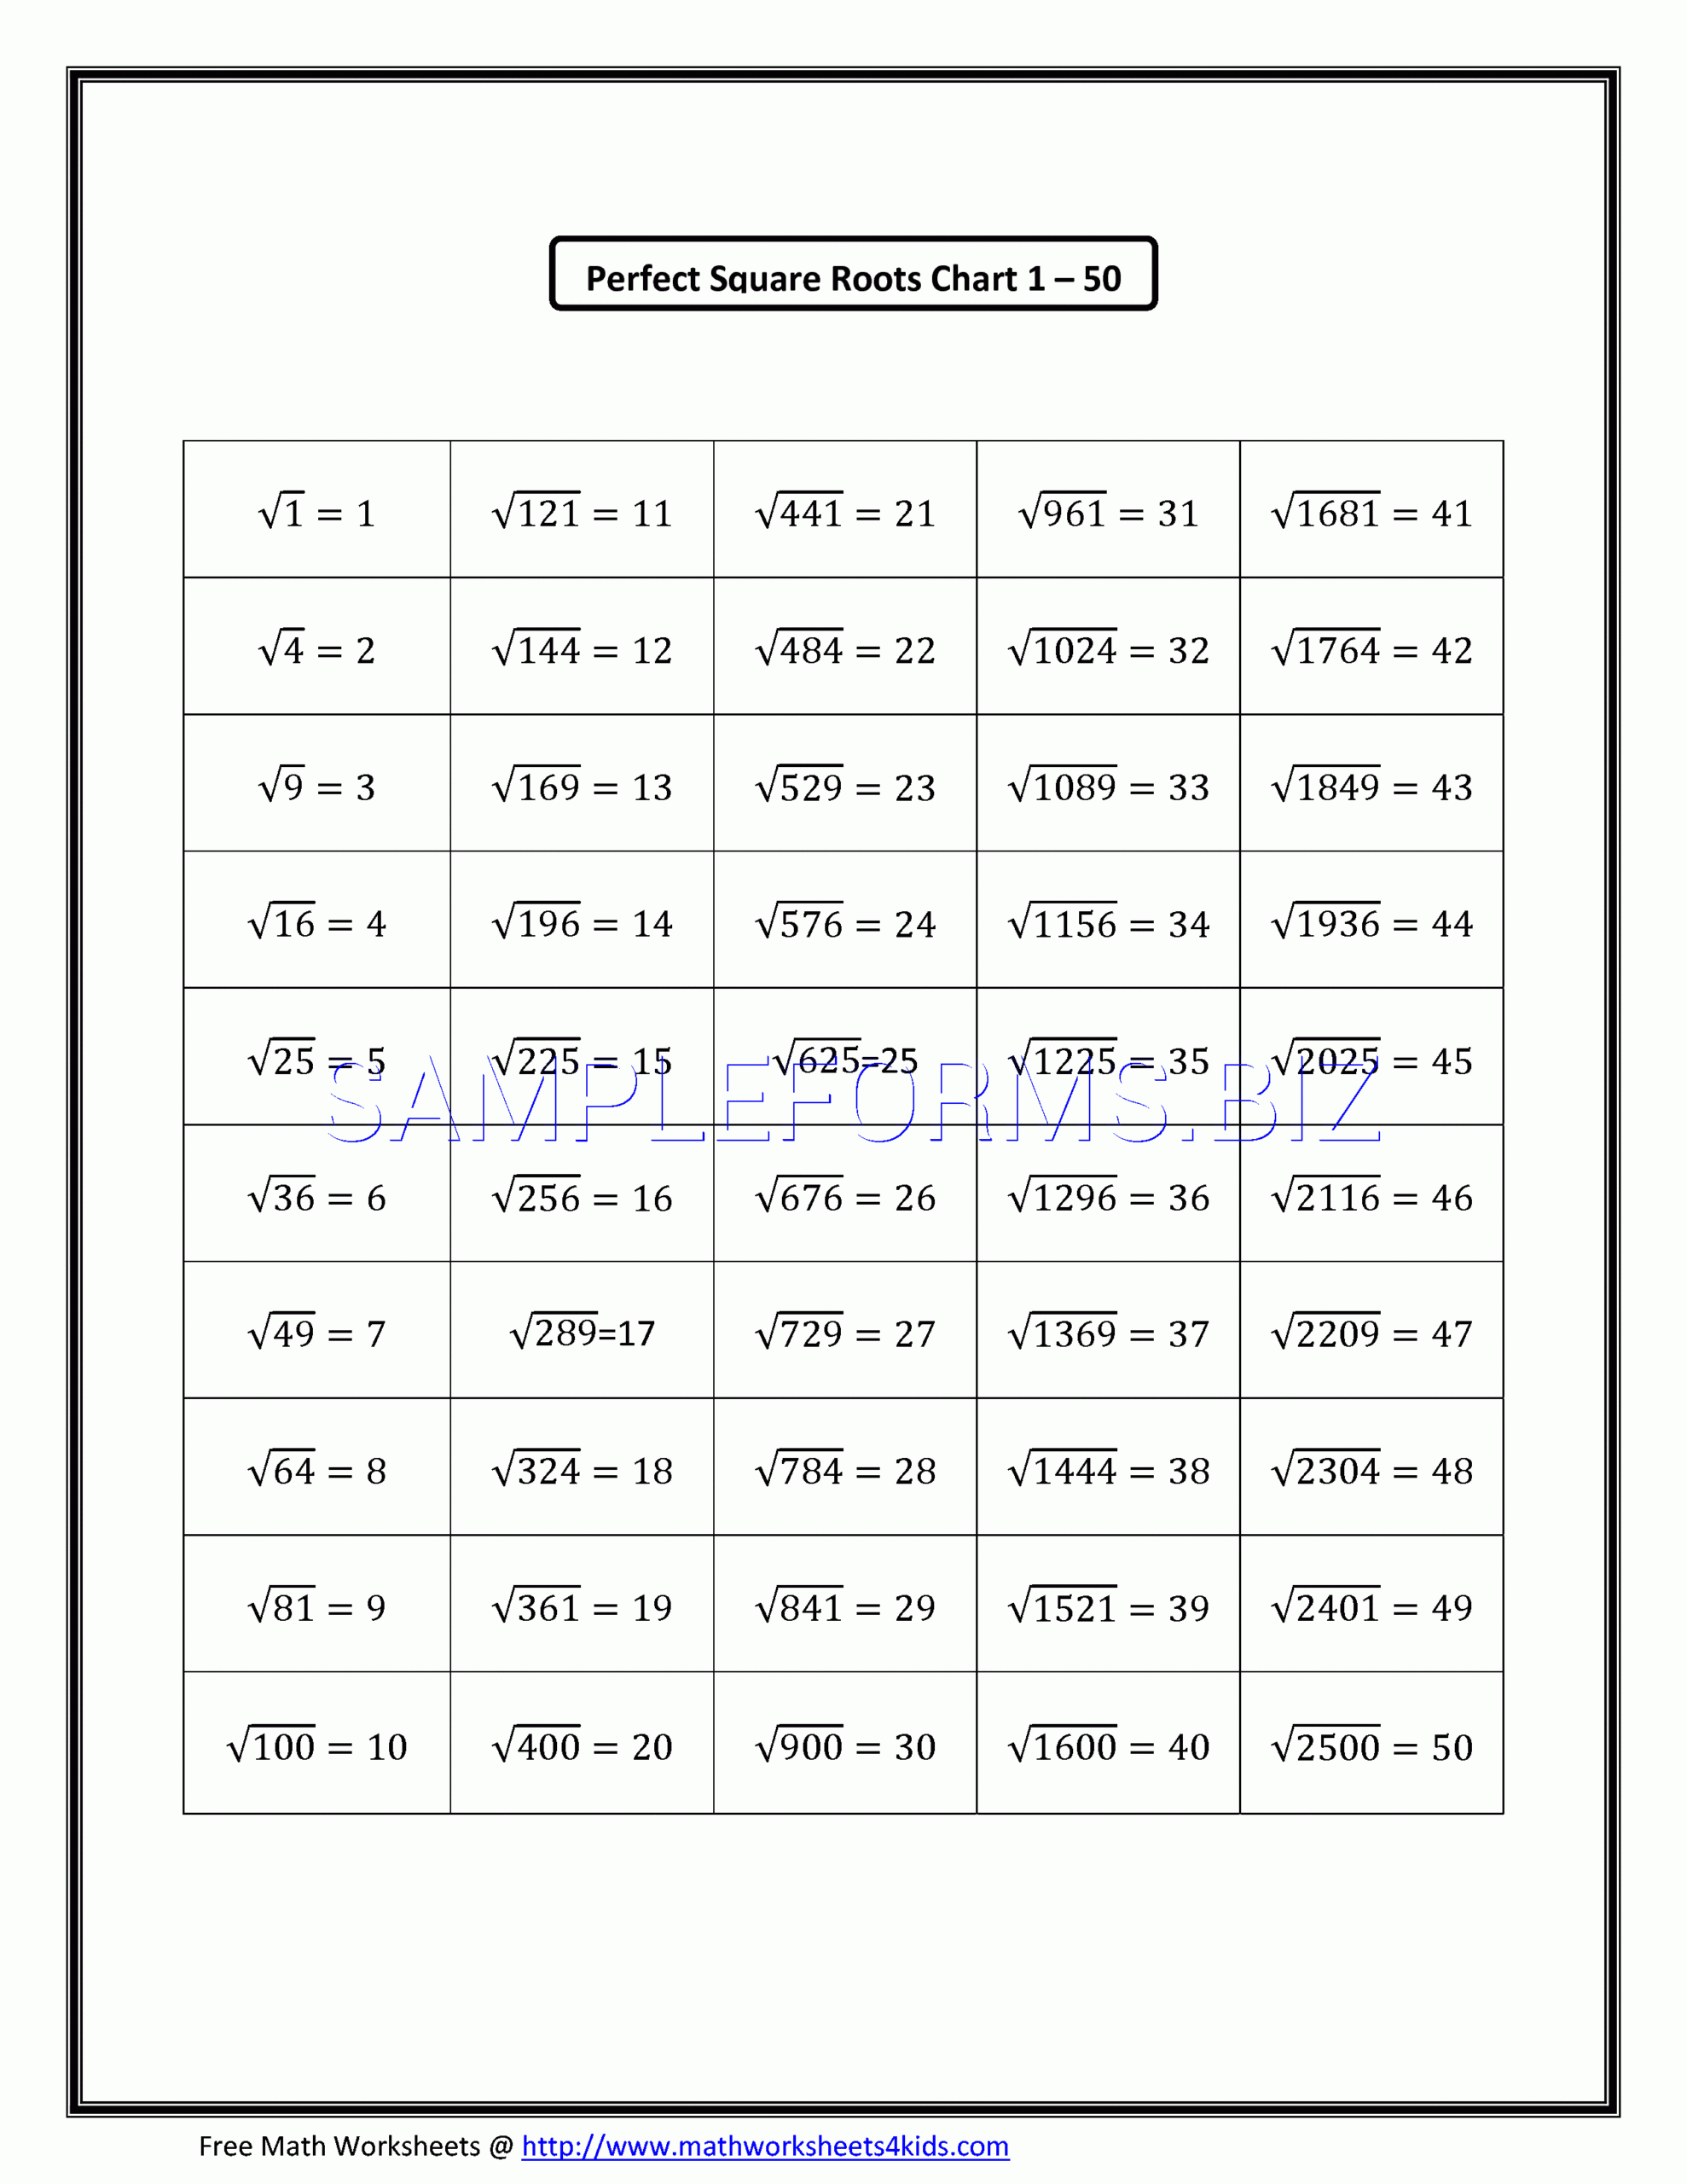 Preview Pdf Perfect Square Roots Chart (1 - 50), 1